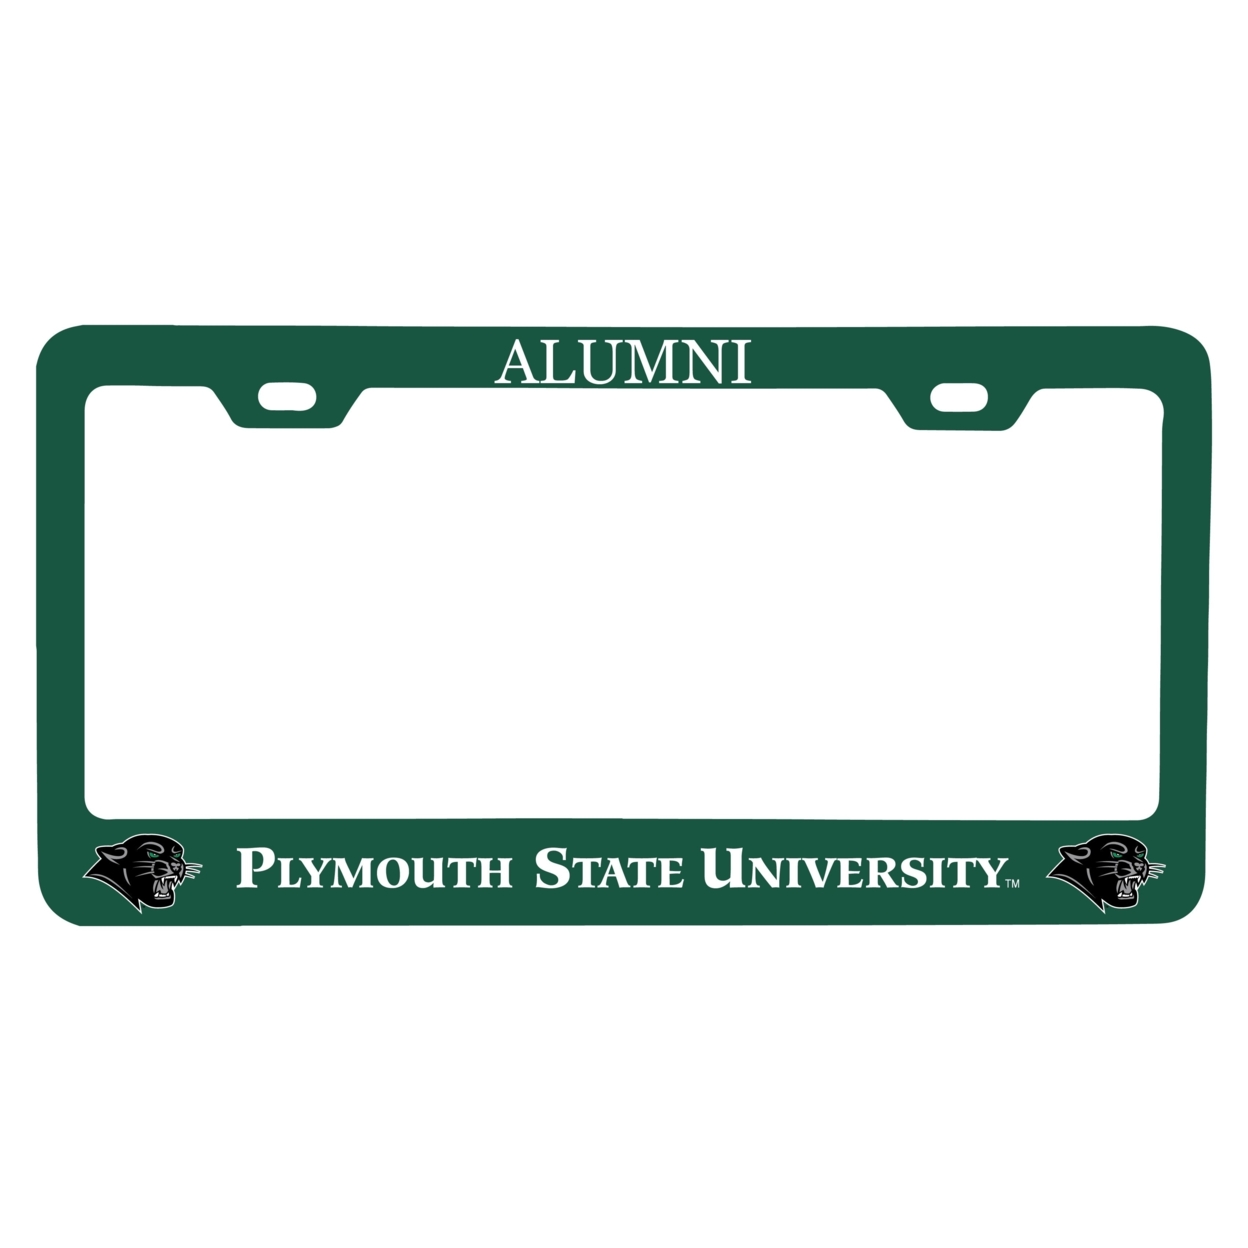 Plymouth State University Alumni License Plate Frame